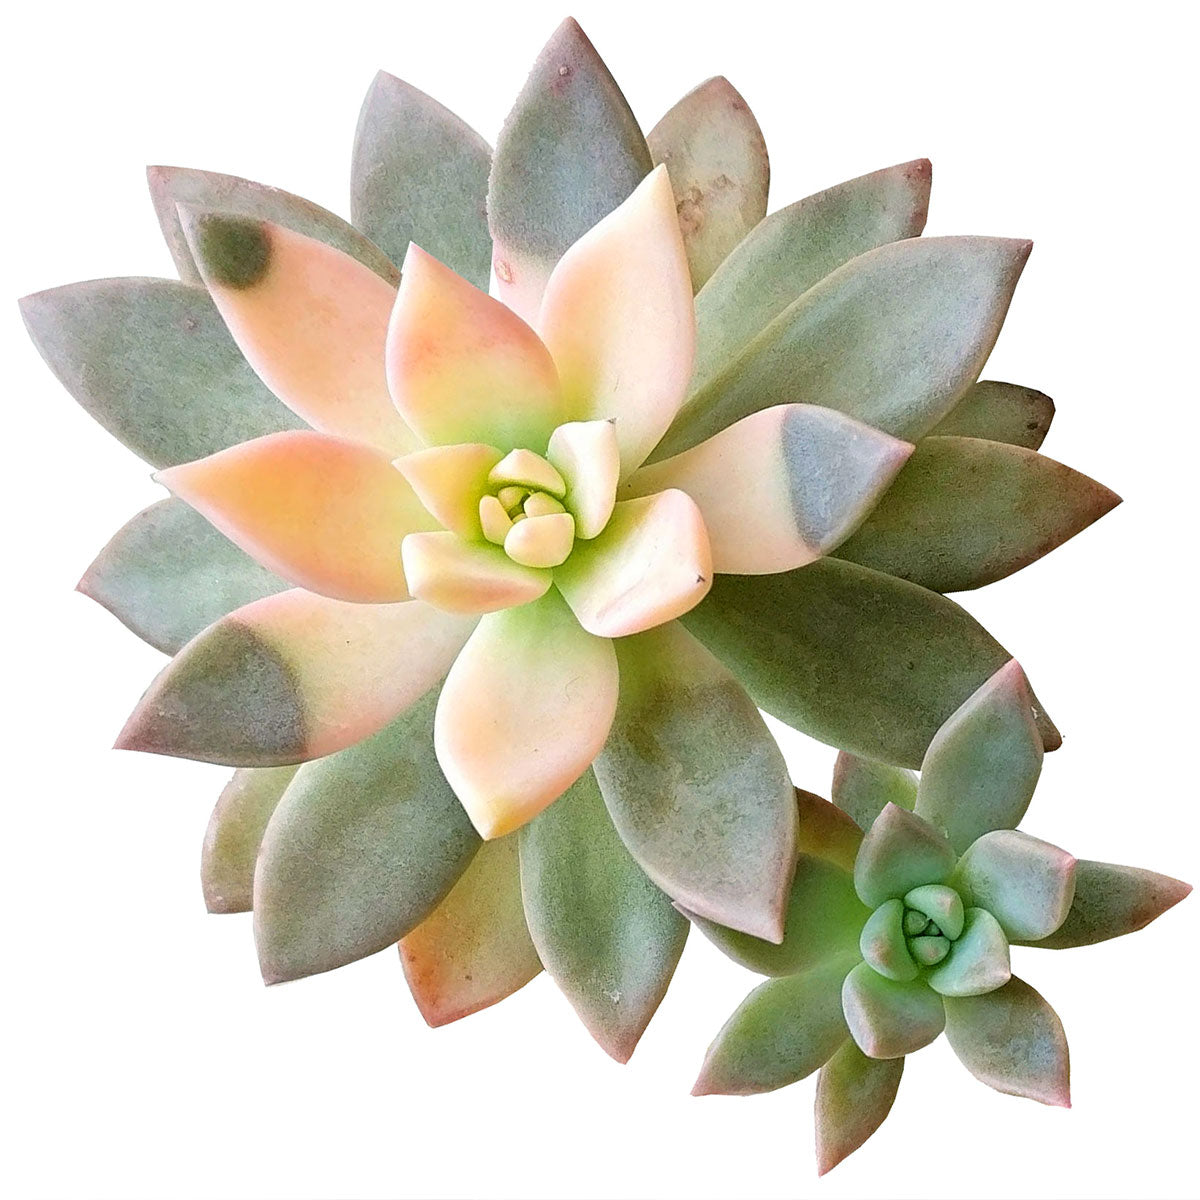 variegated ghost succulent for sale, graptopetalum ghost plant, monthly succulents, succulent care, succulents store in CA, cactus, succulents shop in California, Succulents, Rare succulents, how to grow succulents, variegated graptopetalum ghost in California, How to grow variegated graptopetalum ghost, rare succulents, rare succulents for sale, unique succulents, buy succulents online, rare succulent, succulent shop, unusual succulents, succulent store, succulents online 